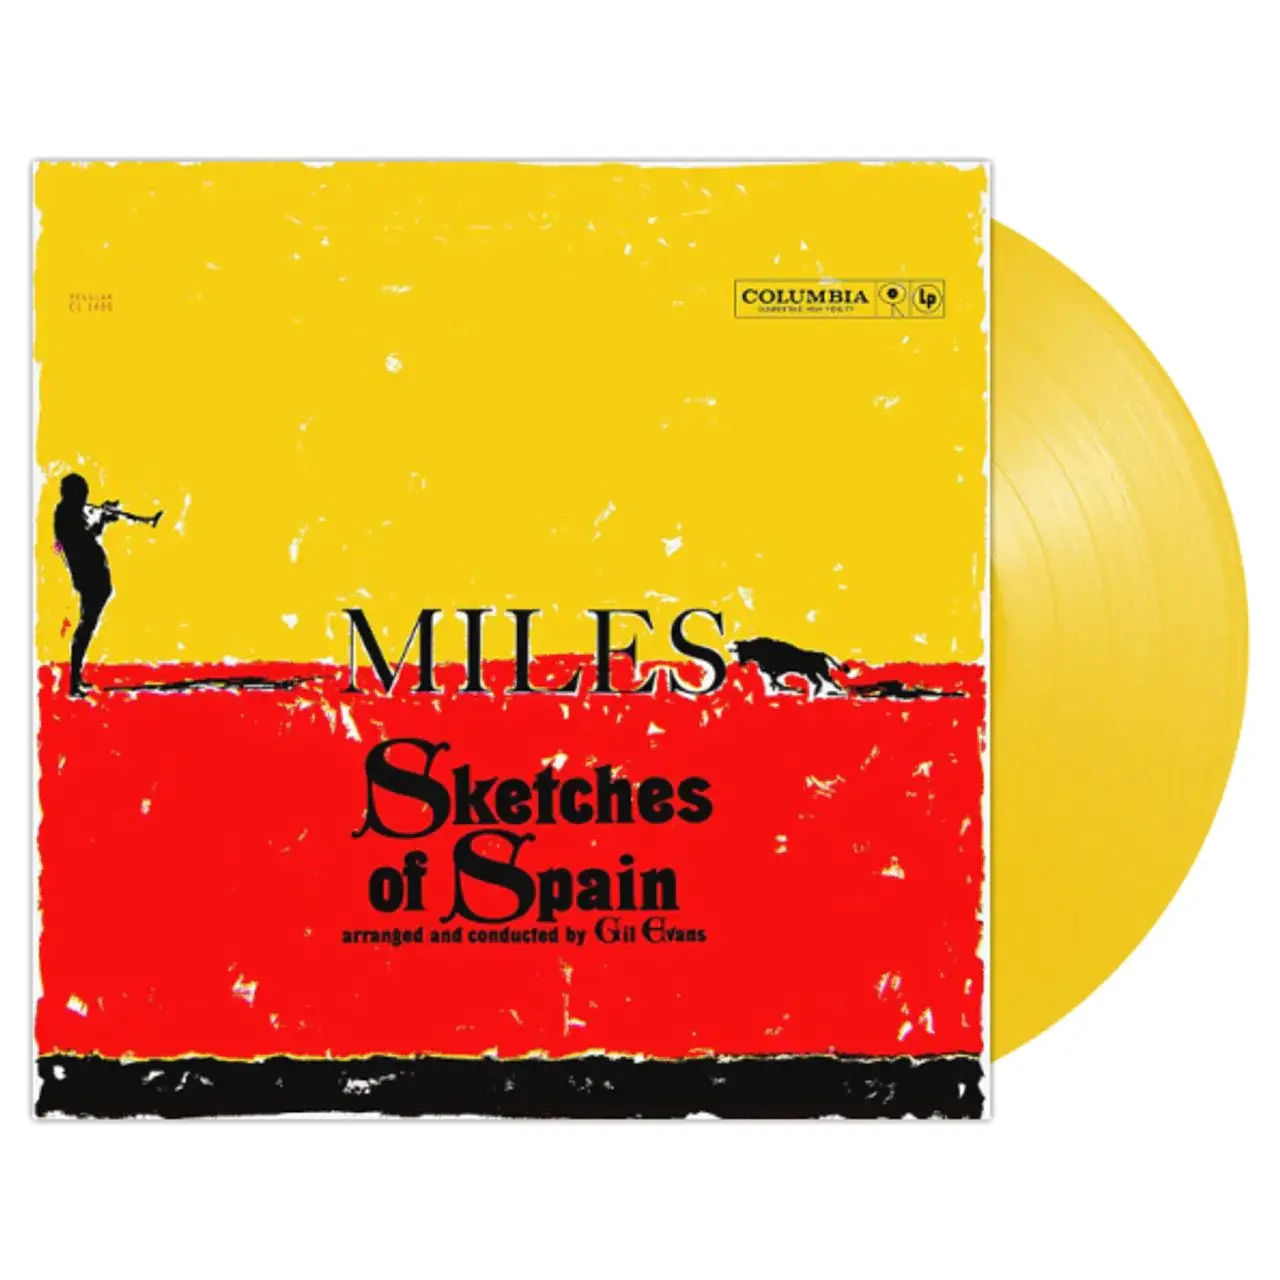 Sketches of Spain  Jazz Messengers